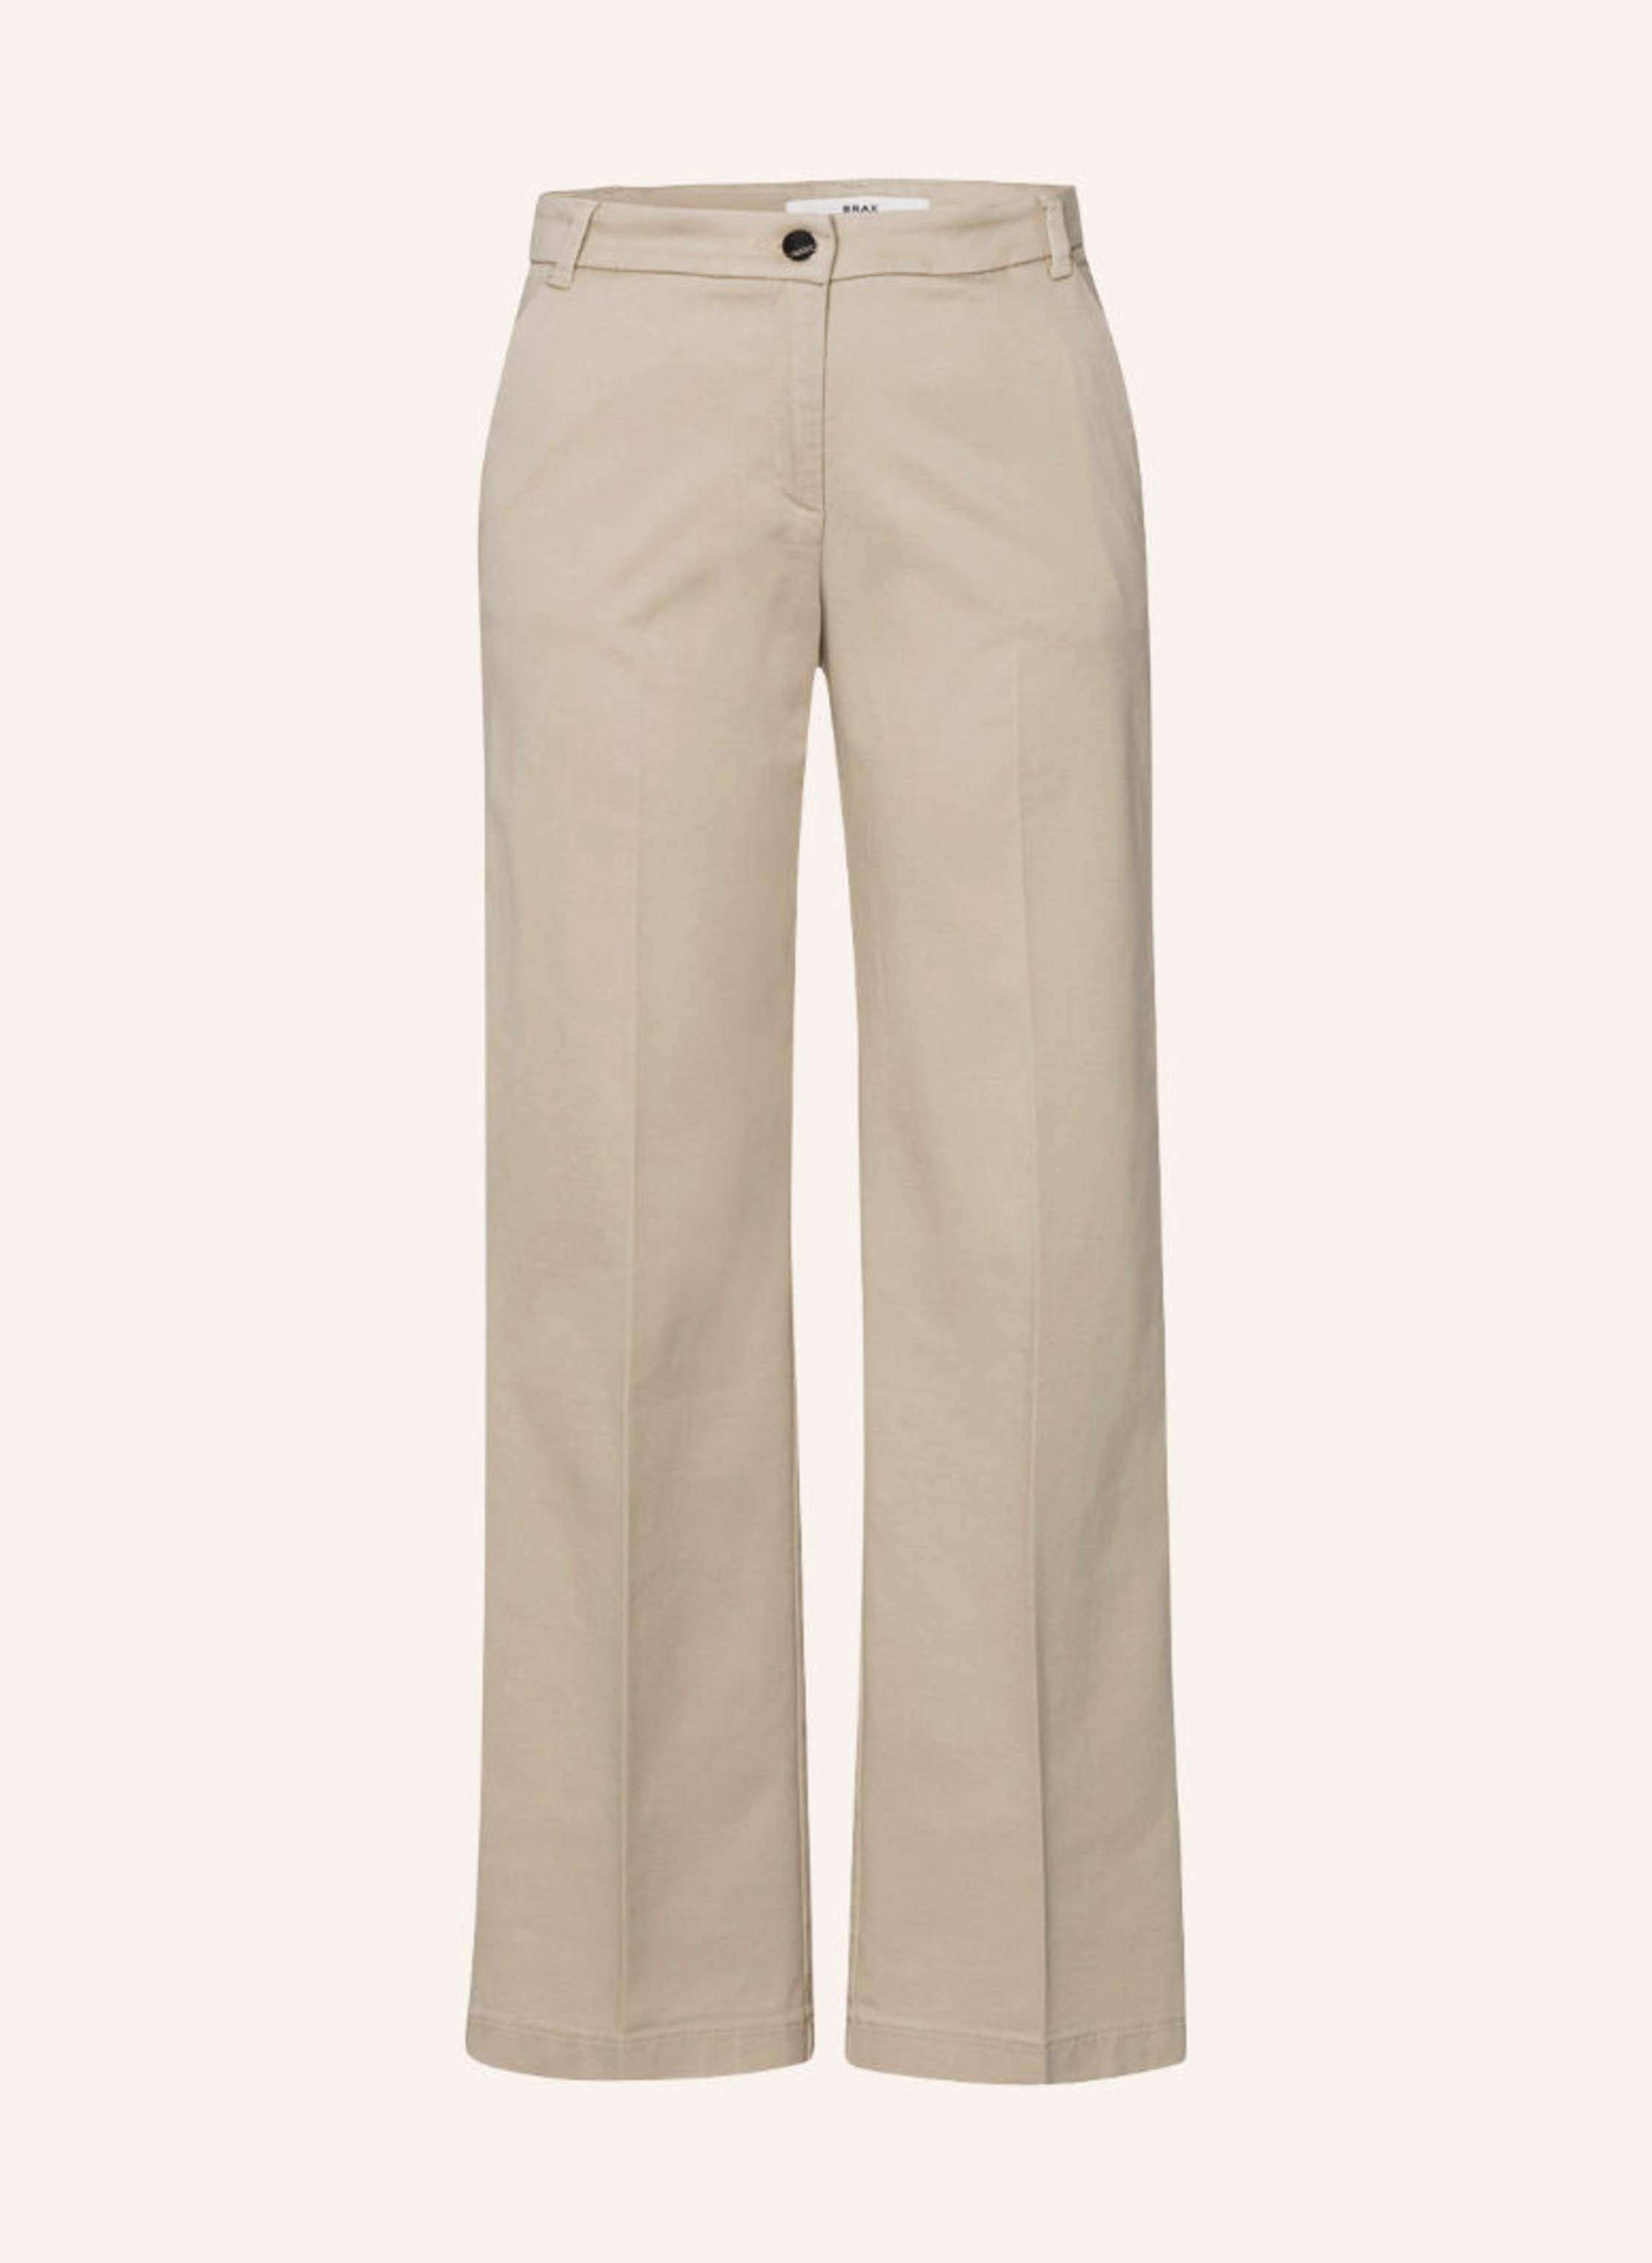 BRAX Palazzohose beige STYLE in MAINE